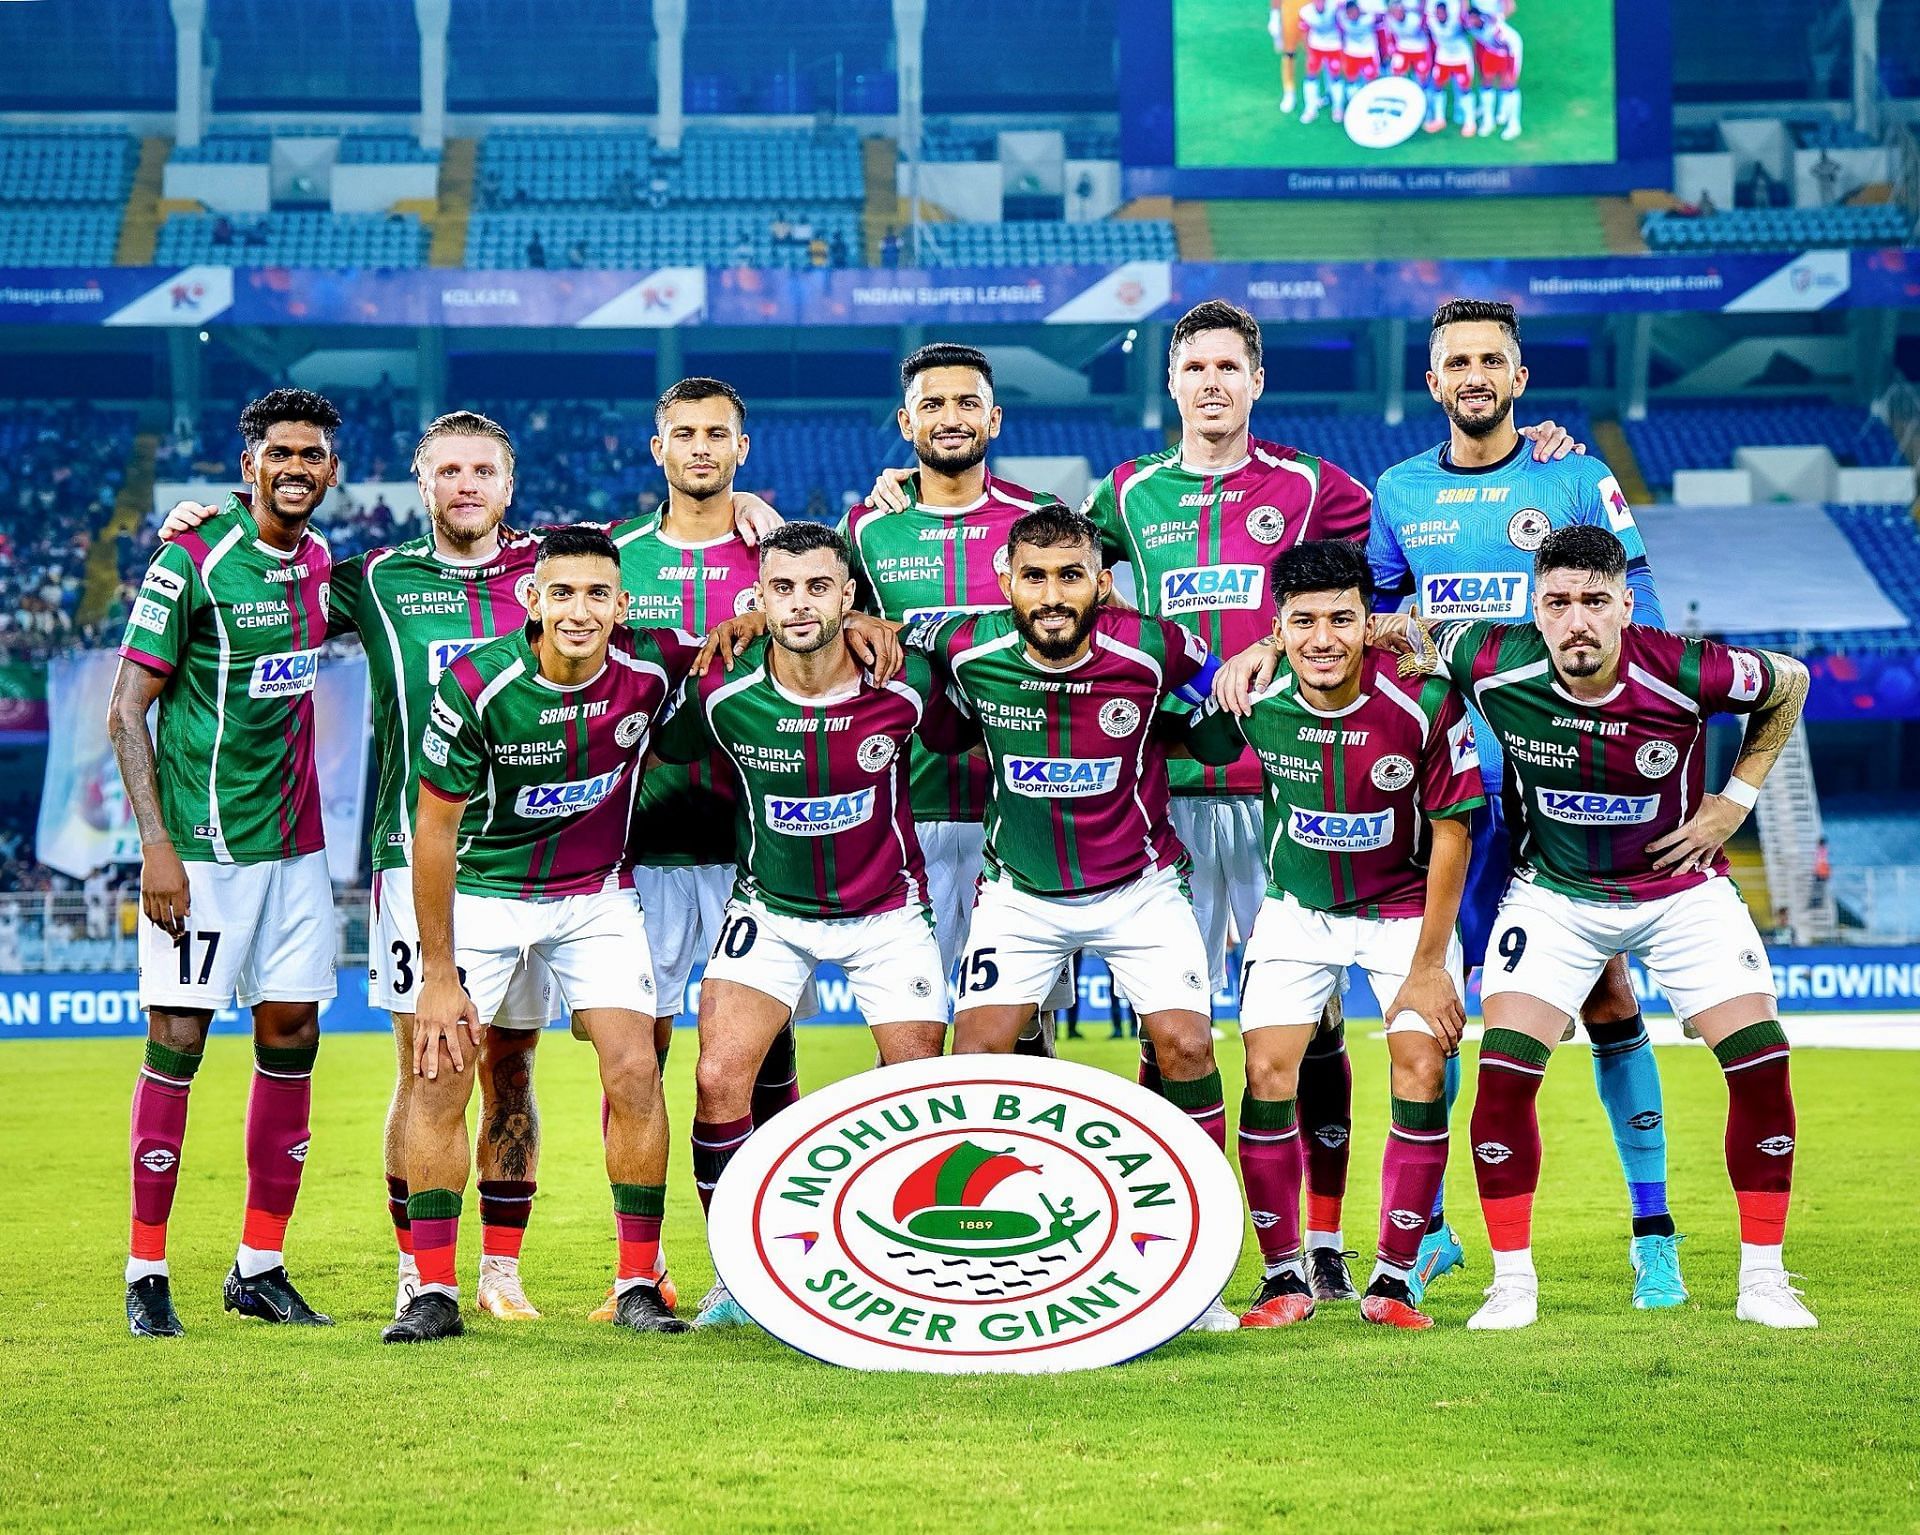 Mohun Bagan picked up their 2nd win from as many games. (Image - MBSG Media)